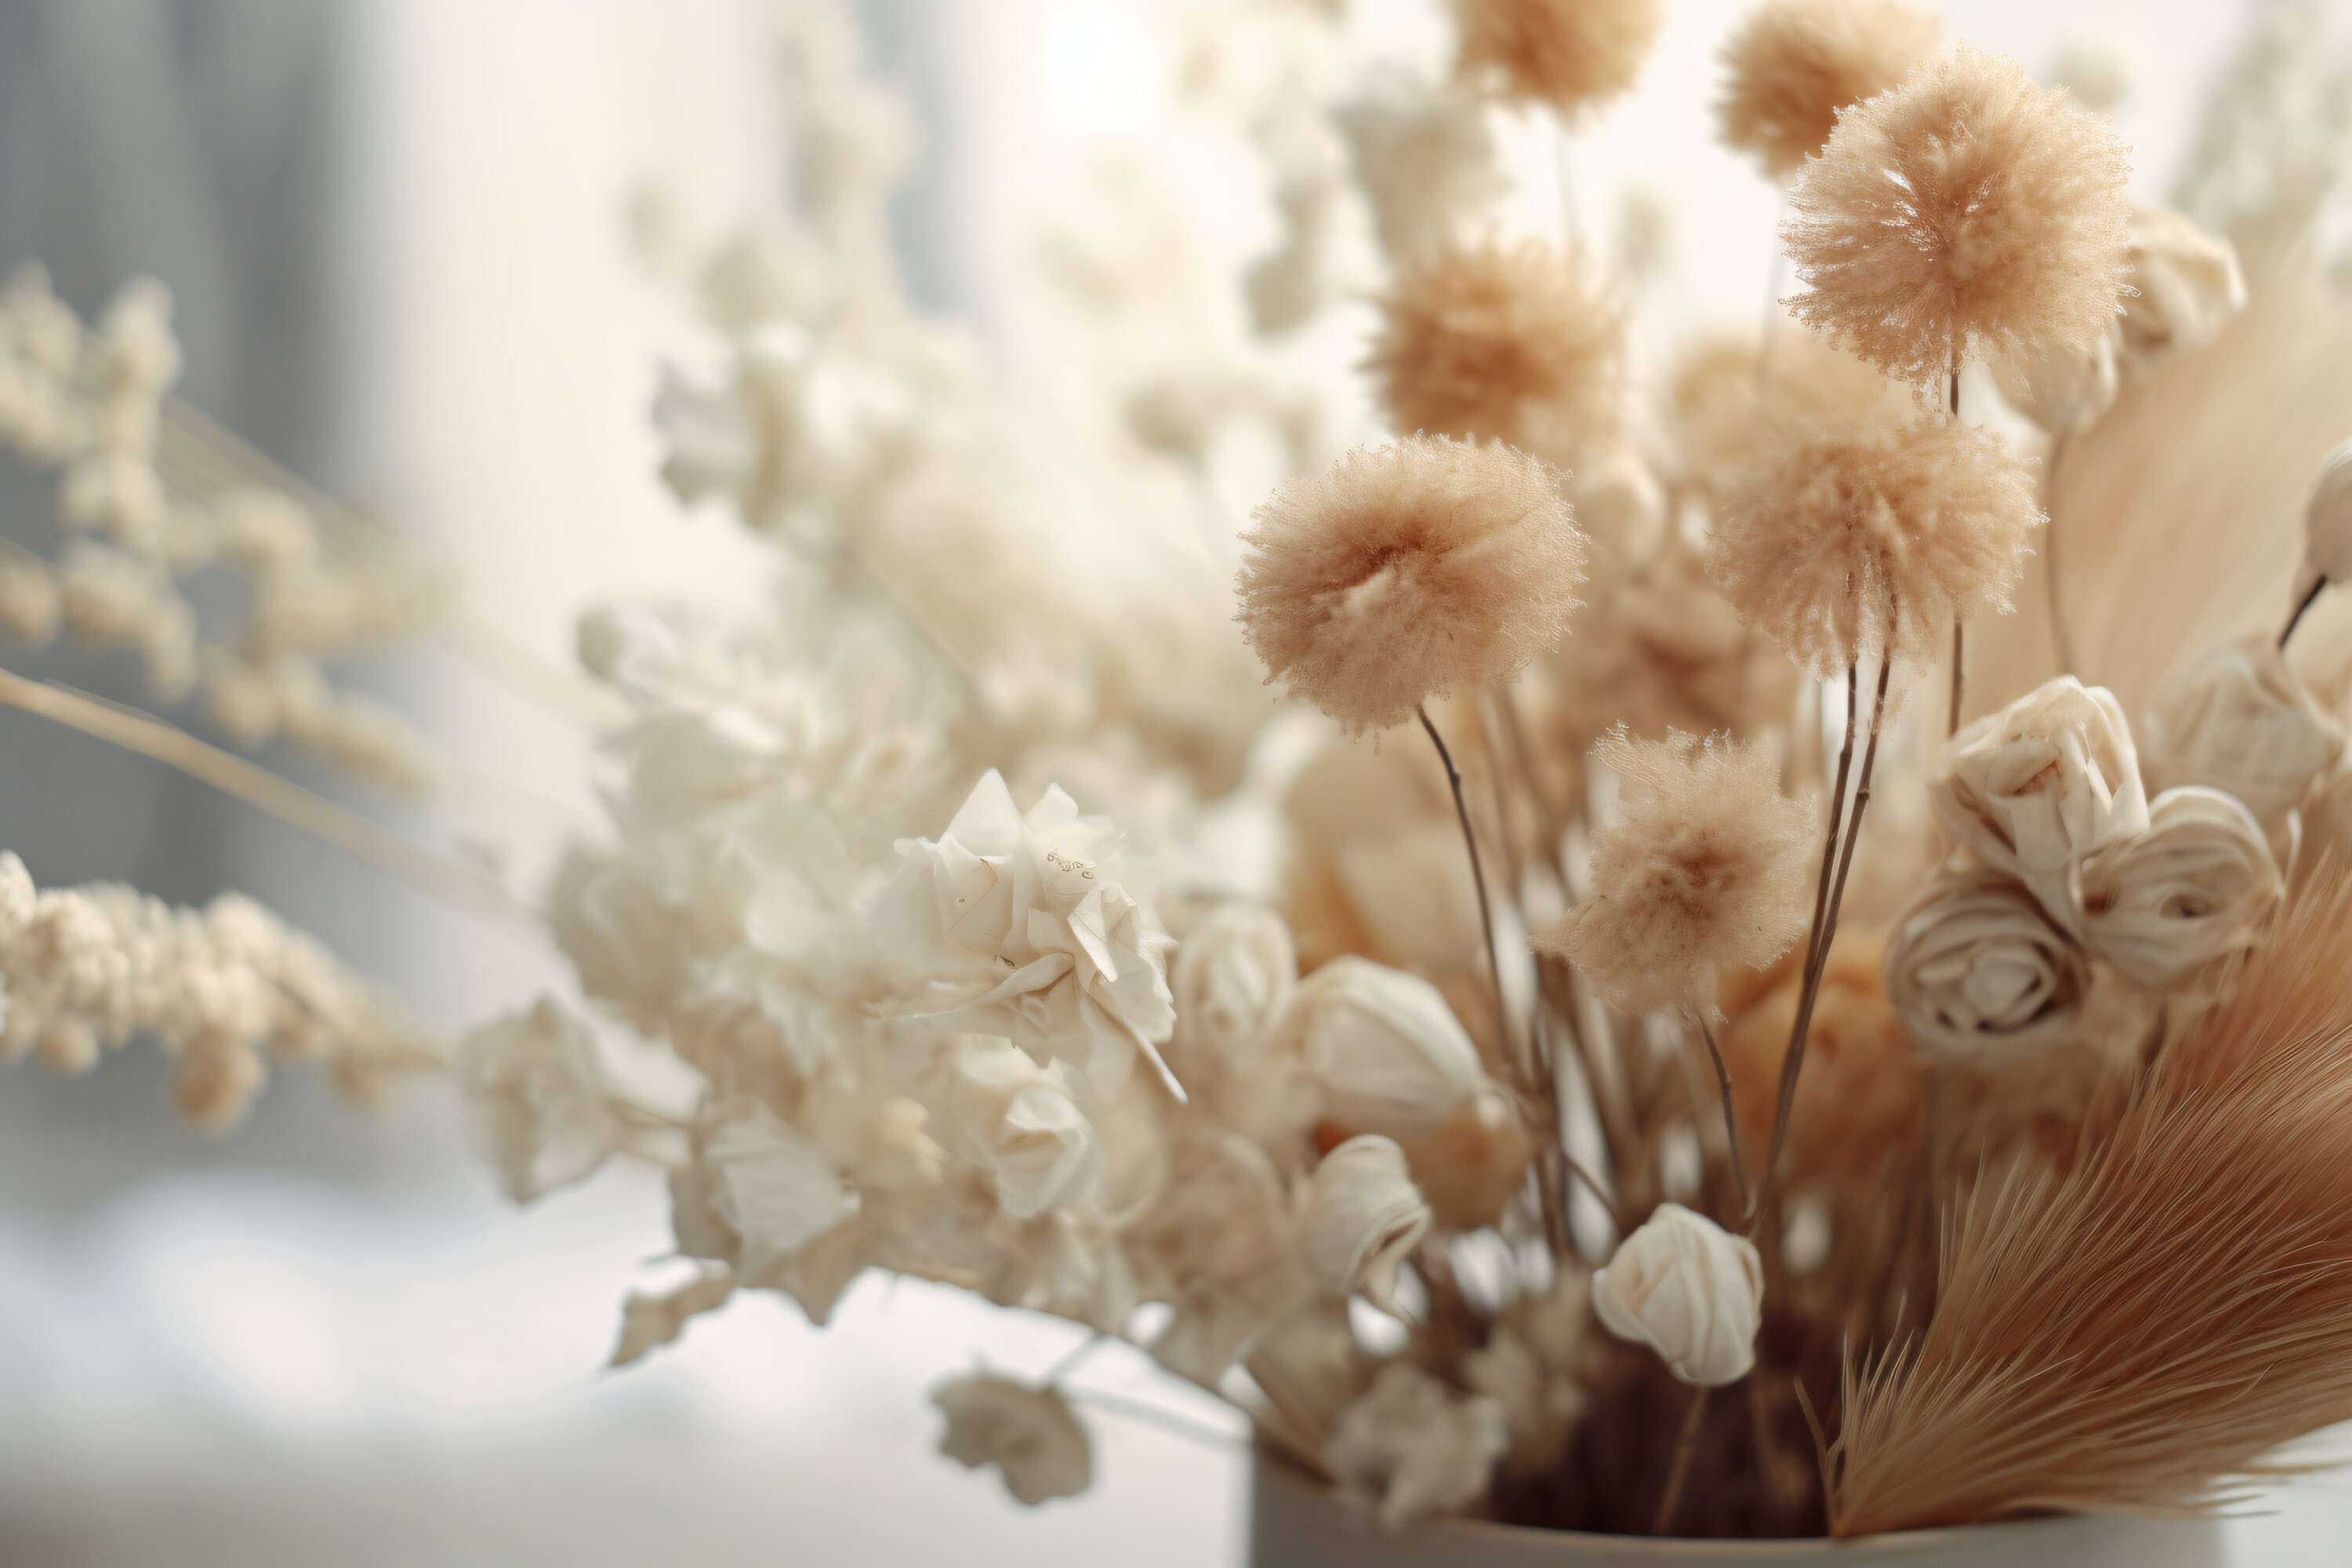 Dried Flowers Still Life White Floral 69 Graphic by shahsoft